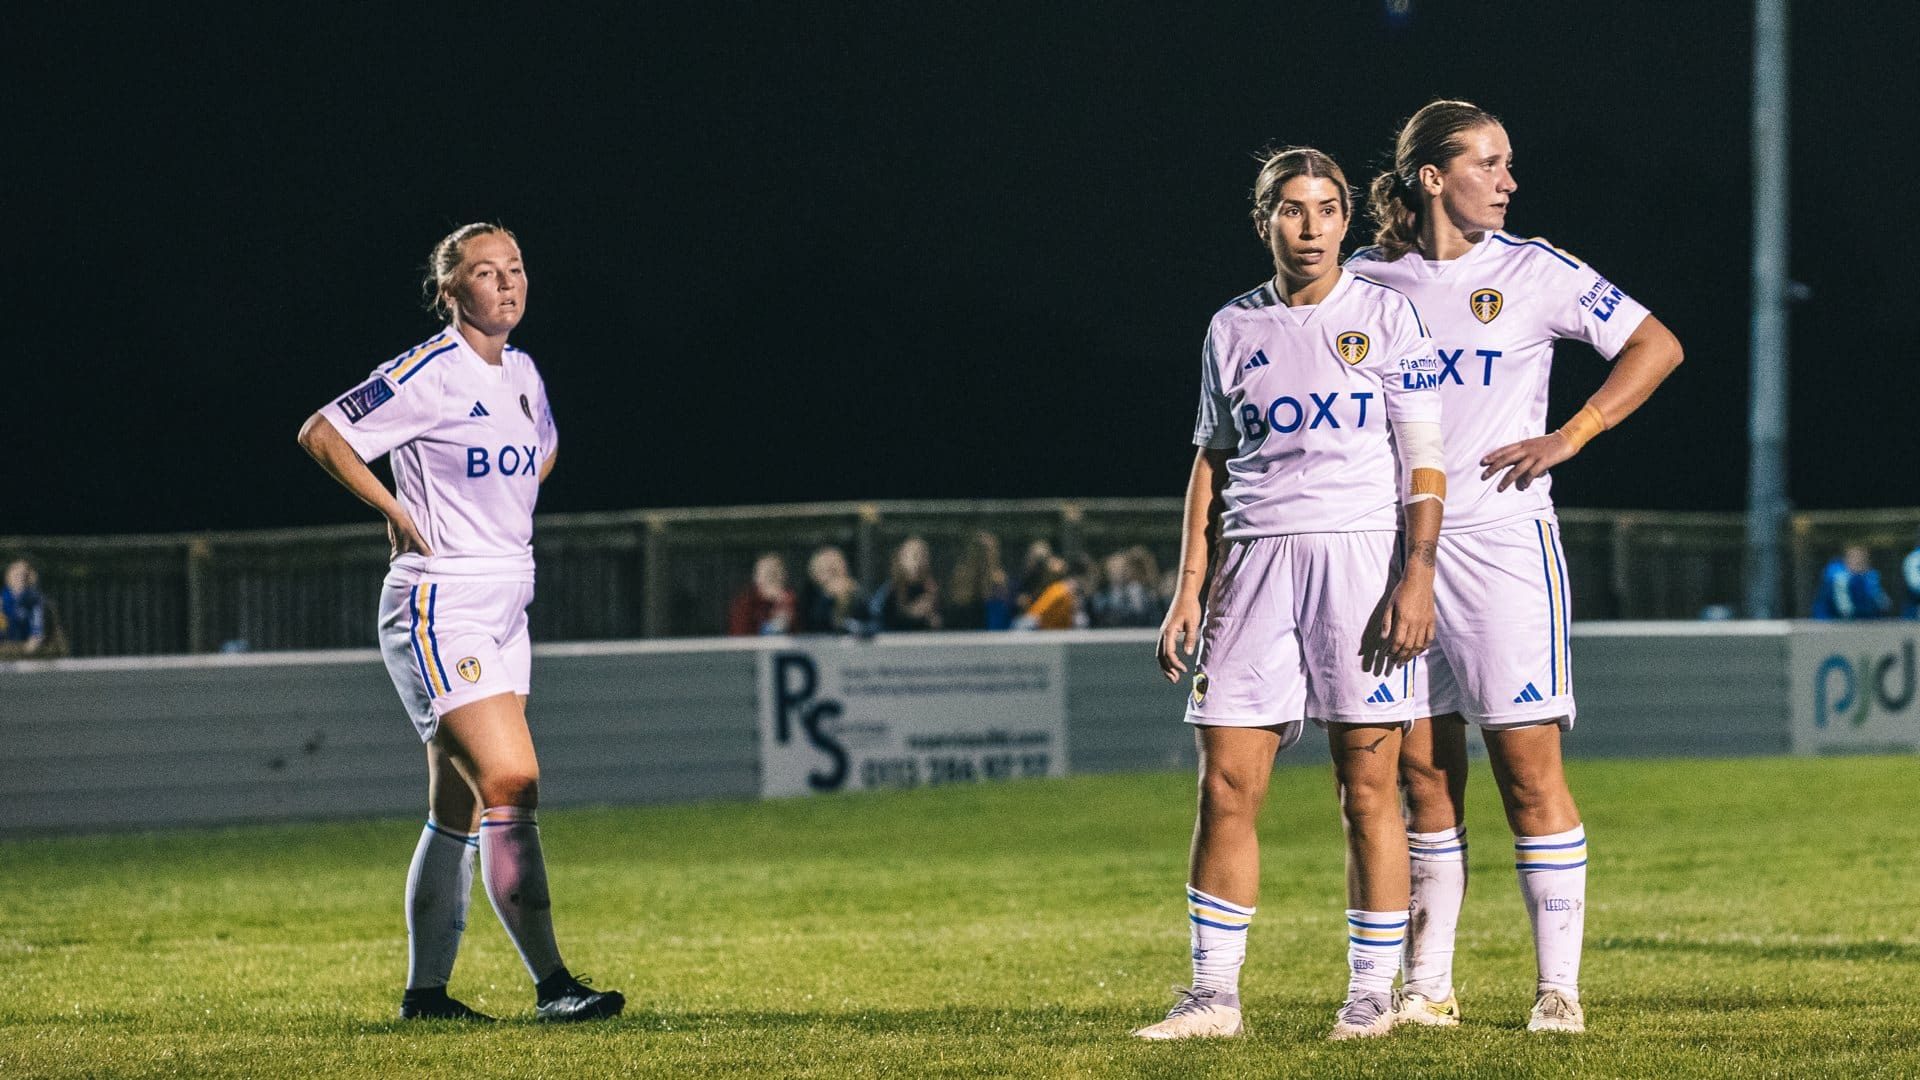 Ellie Dobson, Kathryn Smith and Katie Astle standing in a row during Leeds United Women's recent floodlit win over FCUM